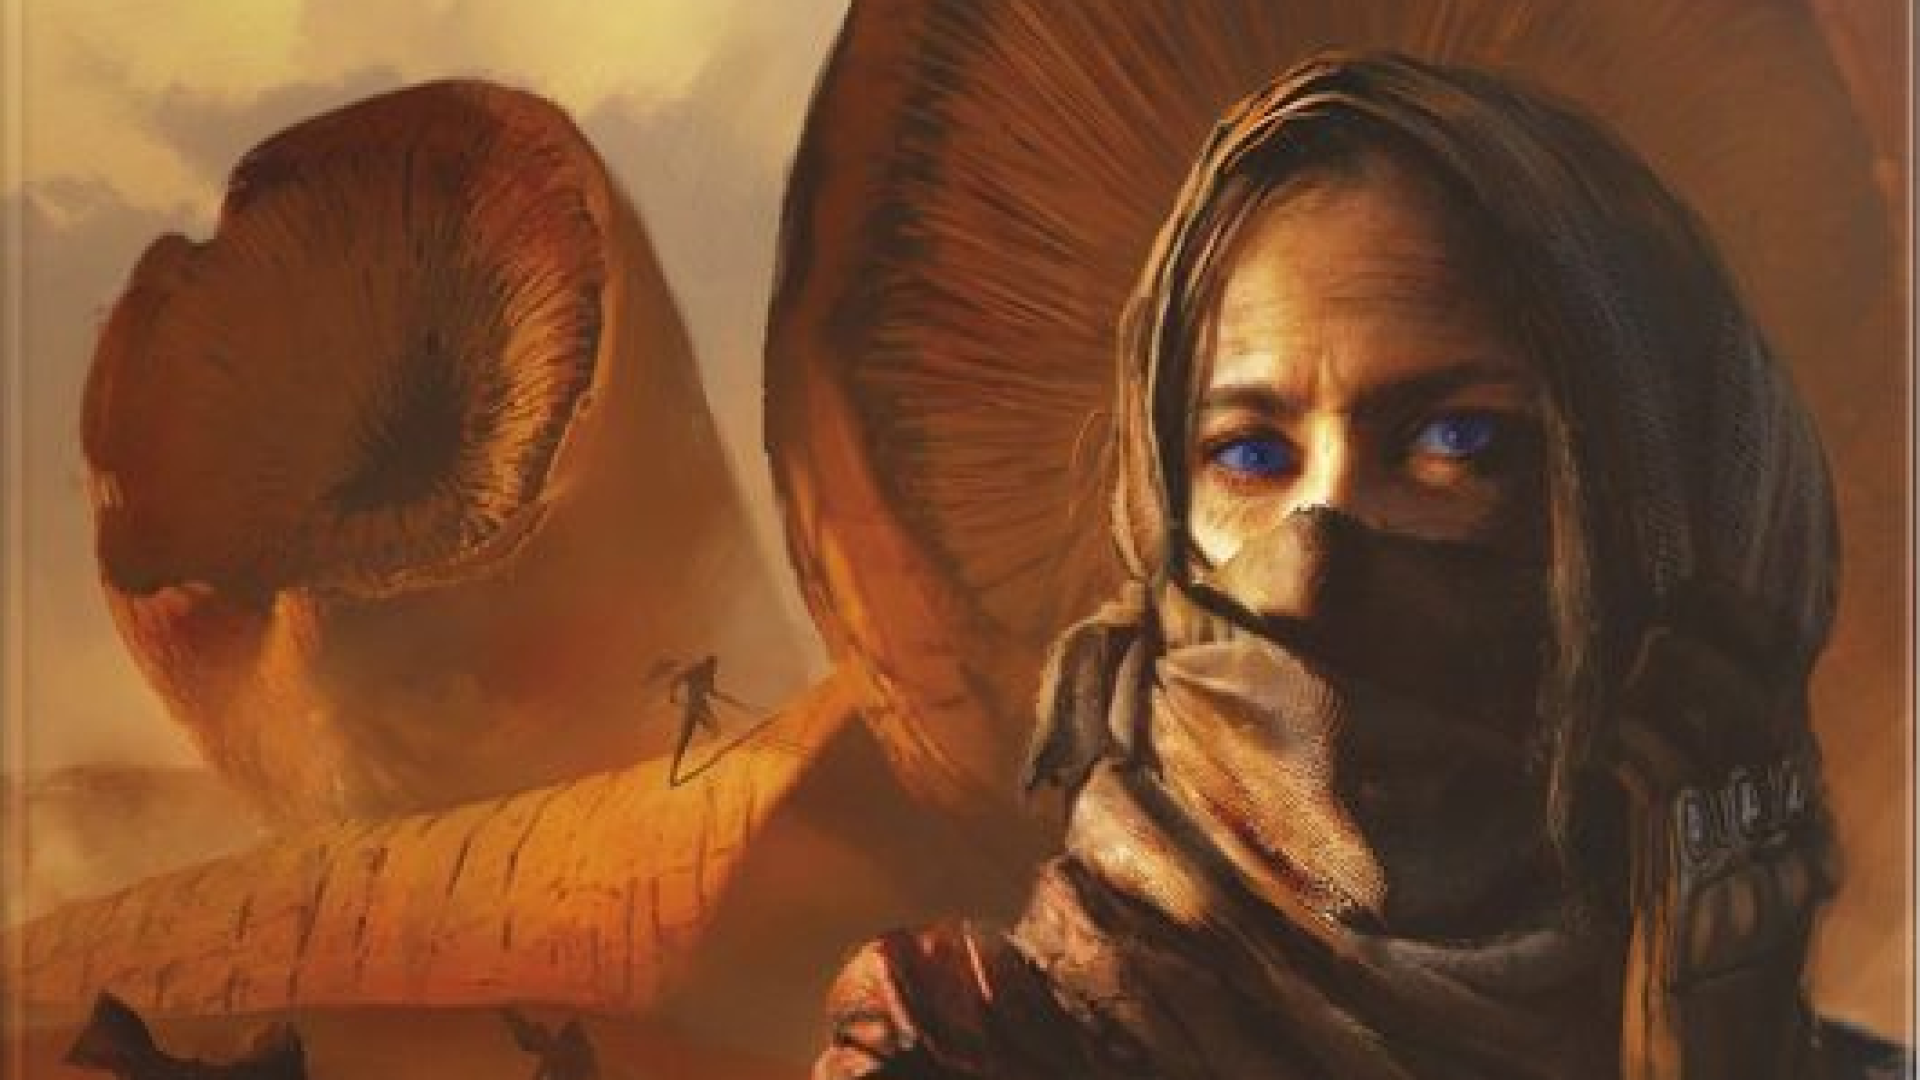 Image for Dune RPG lets players harvest spice on the surface of Arrakis in upcoming sourcebook Sand and Dust